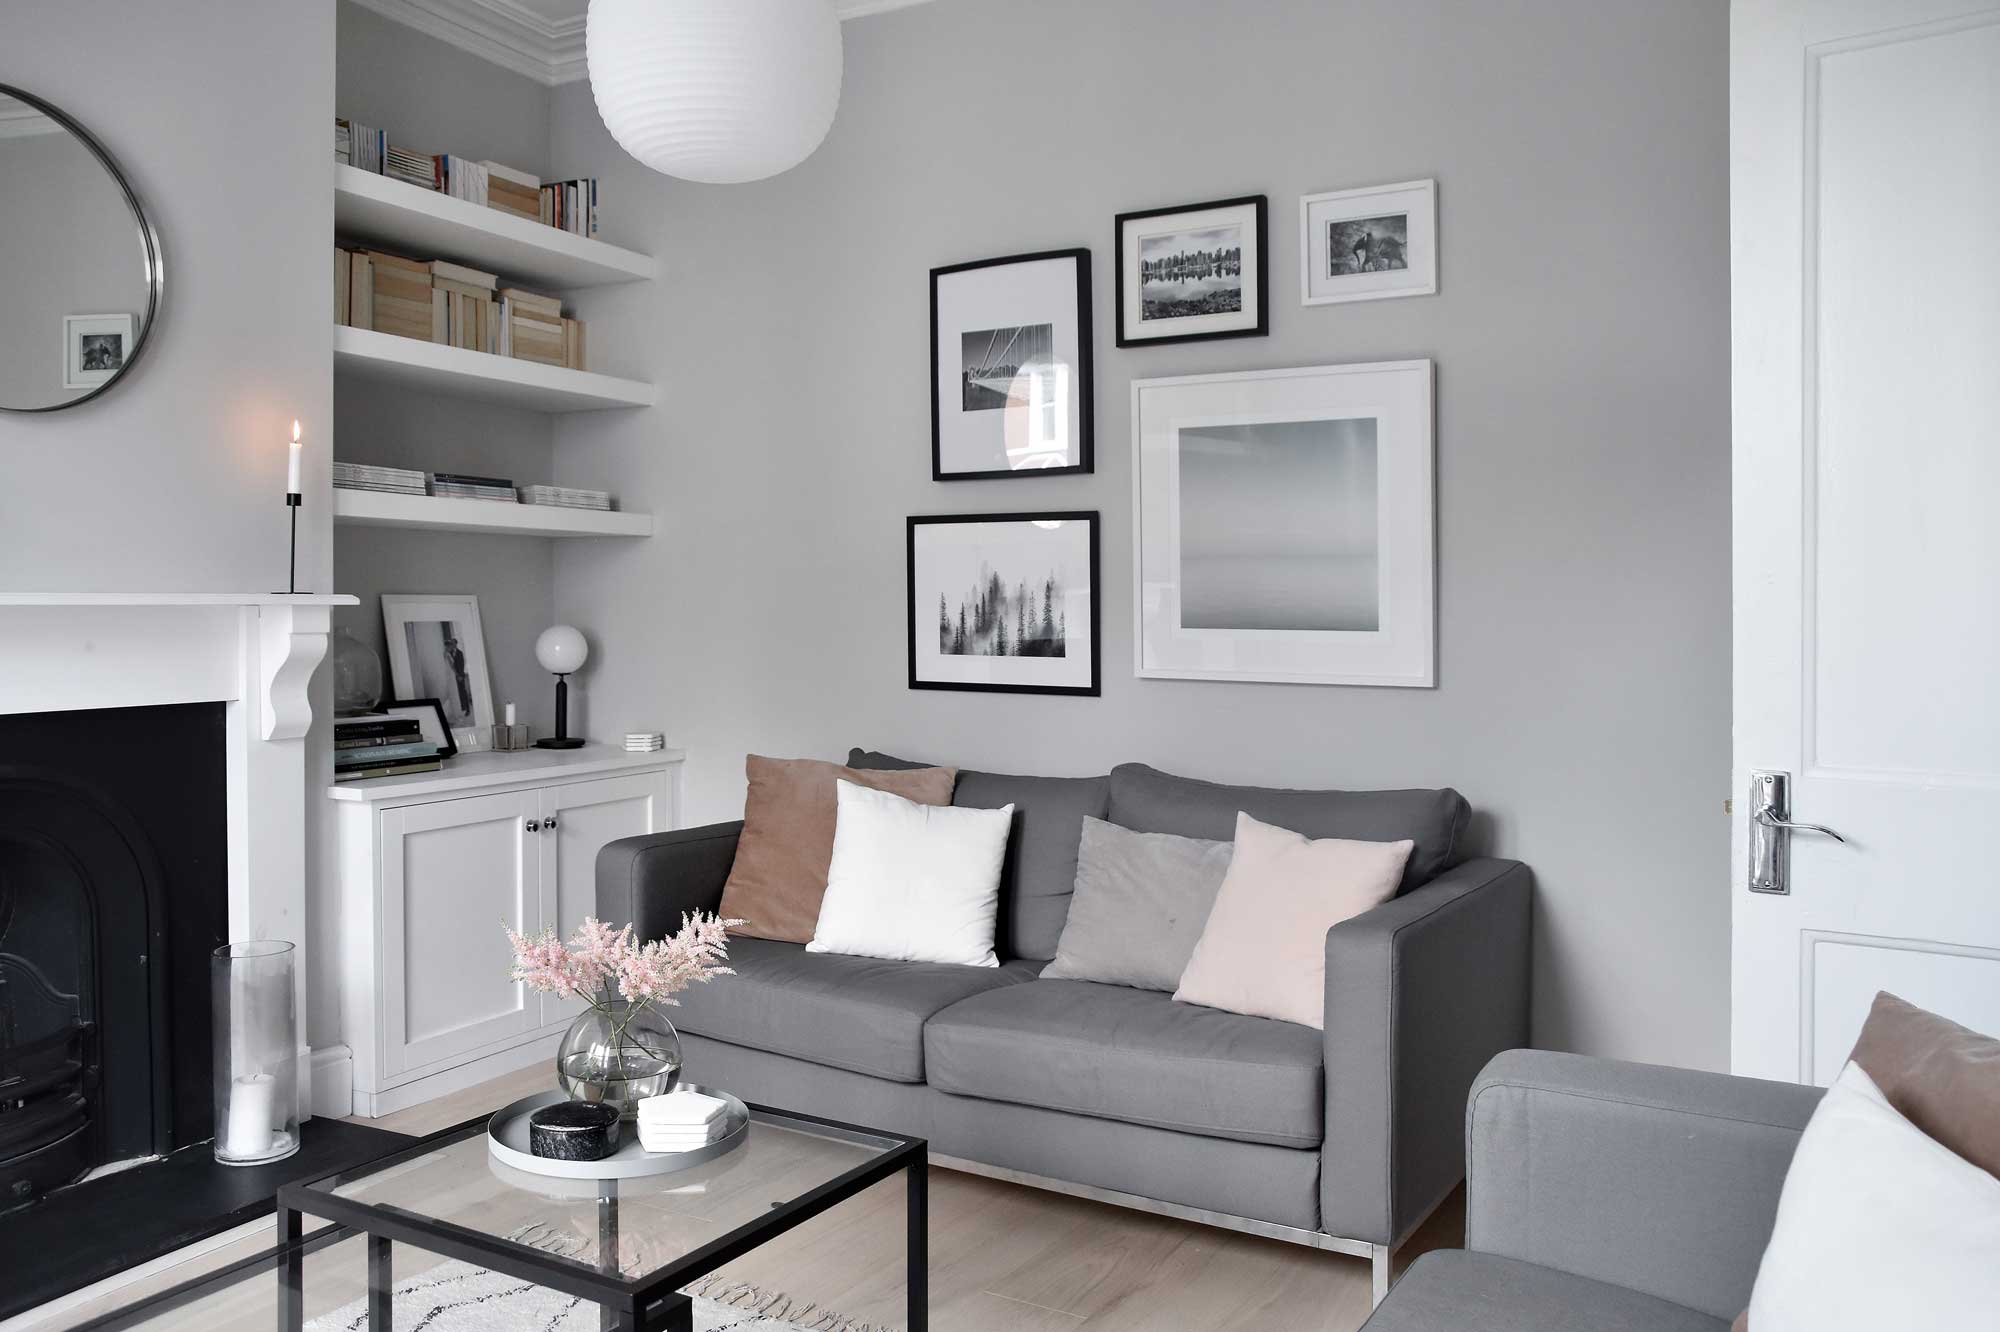 My soft, minimalist living-room makeover – the reveal | These Four Walls blog